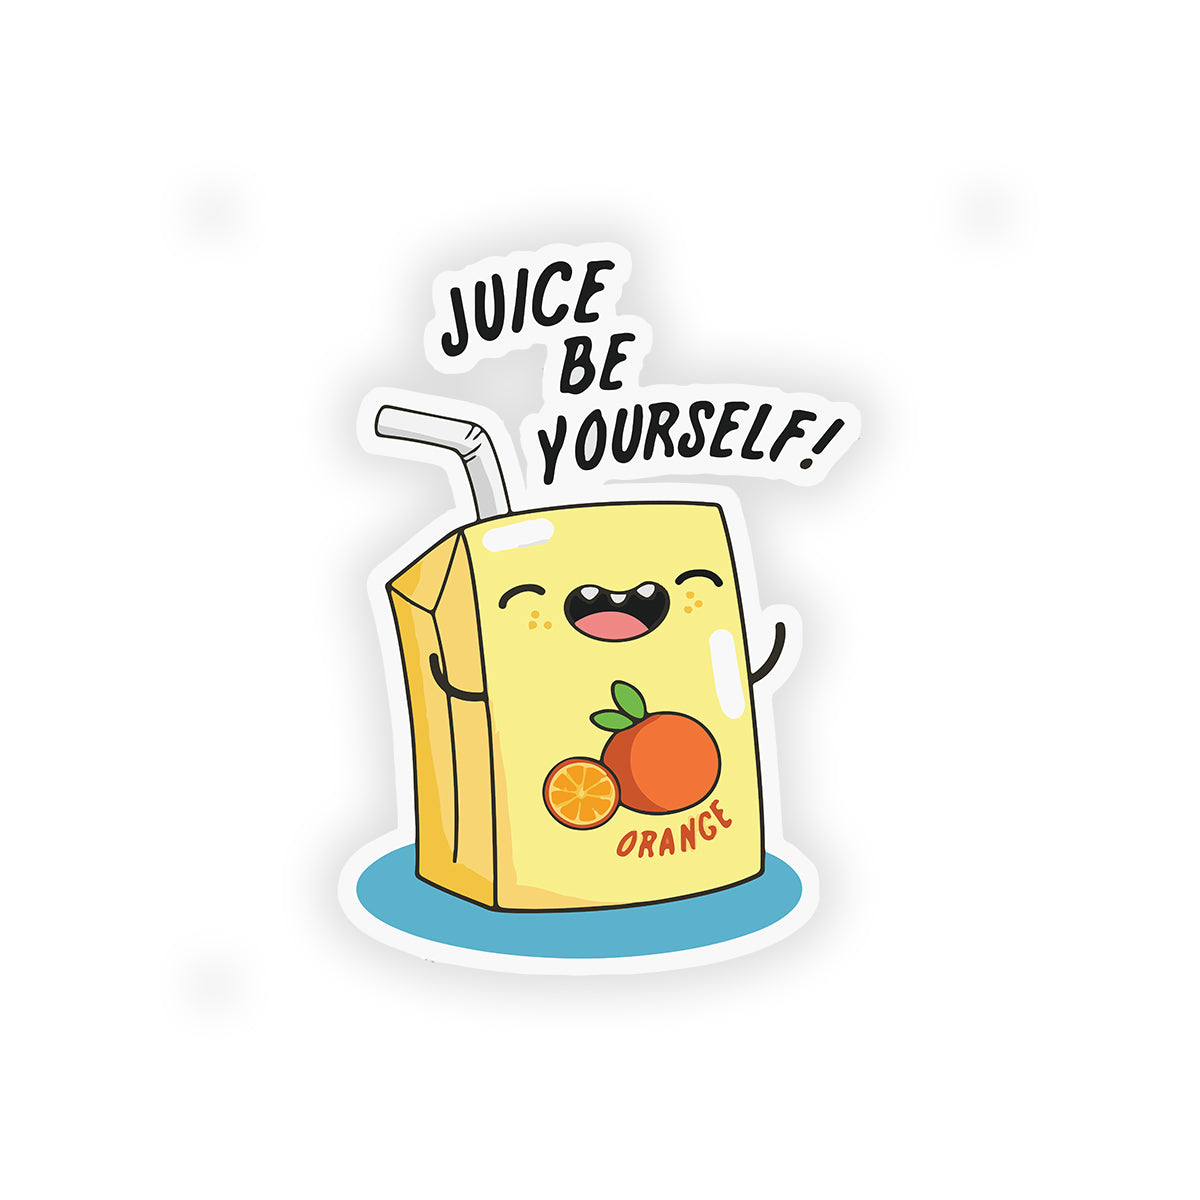 Juice be yourself